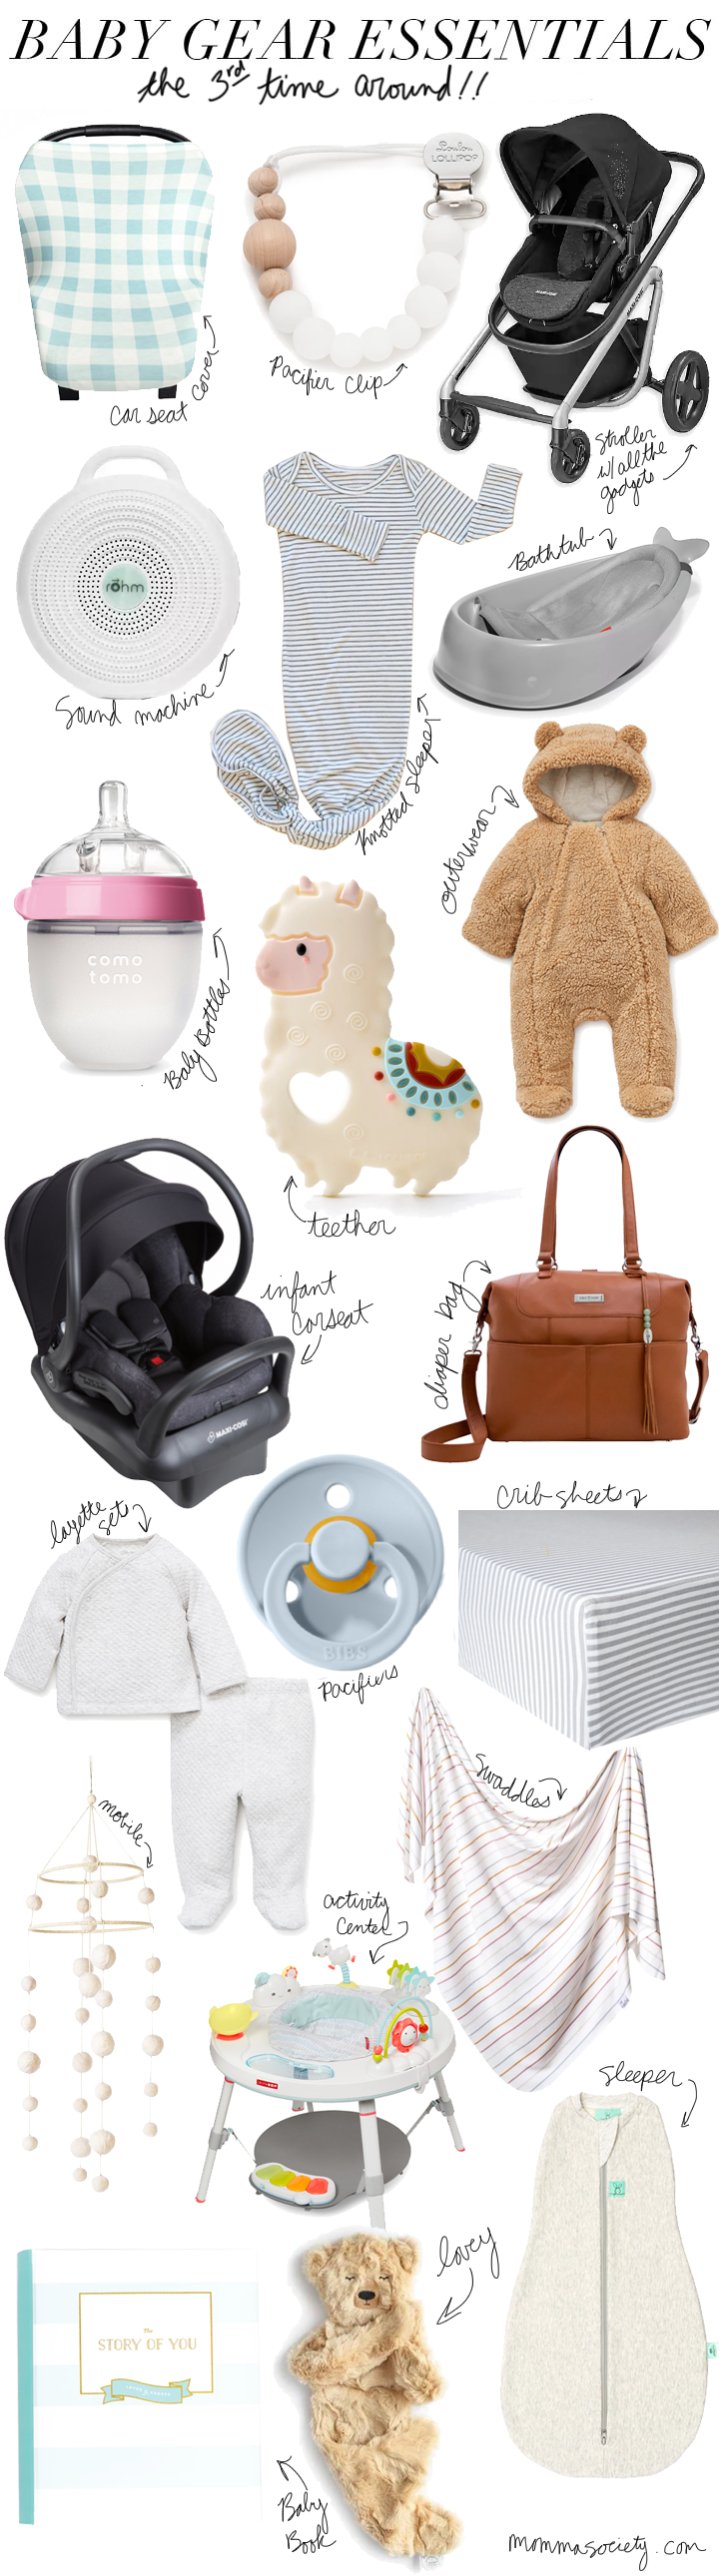 Top 15 Baby Items for Months 3 & 4 - Seven Graces